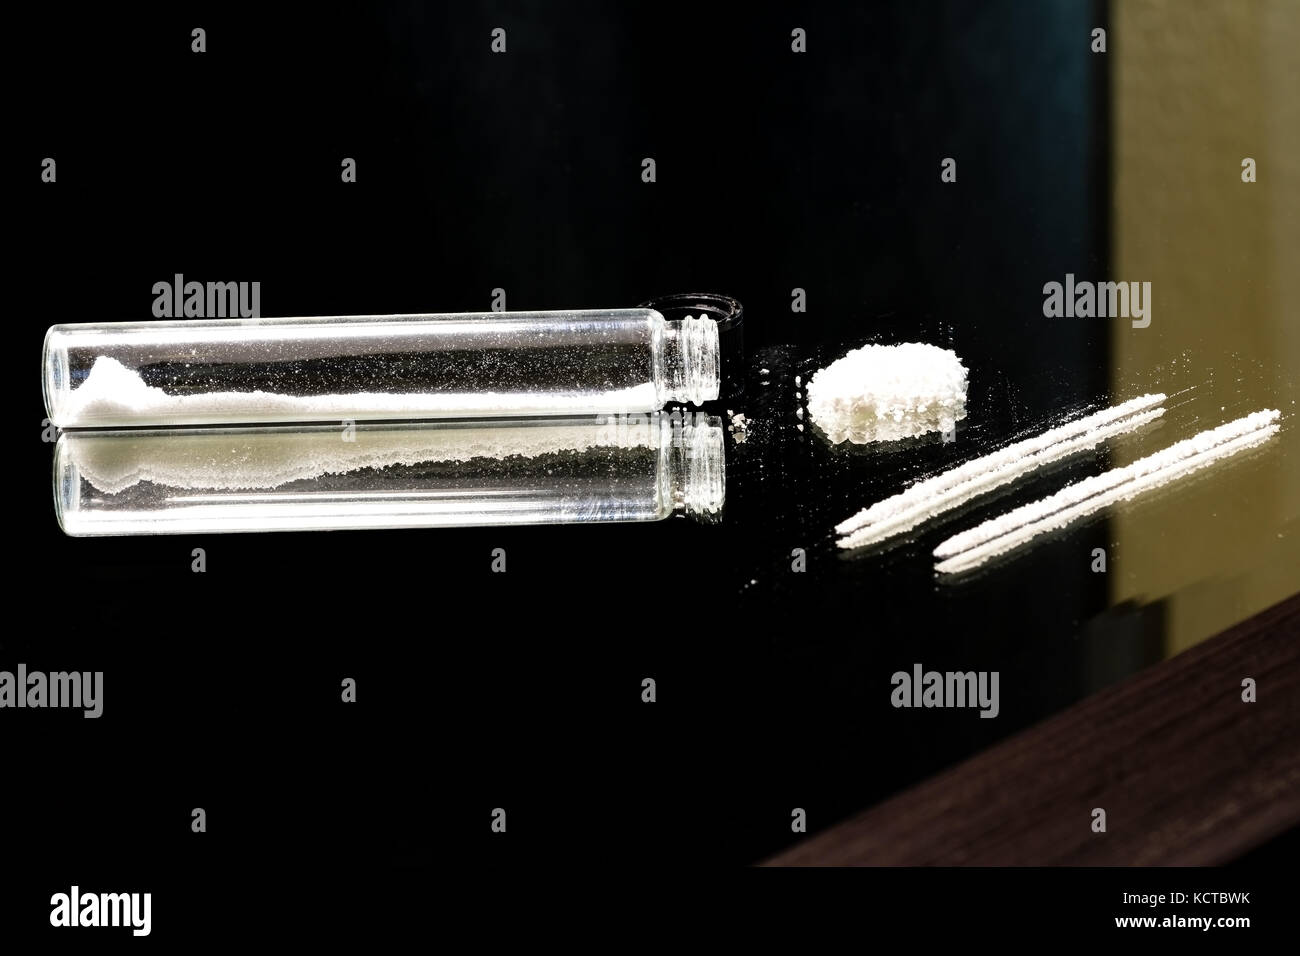 America`s drug epidemic has been brought heavily to light in recent years  and Cocaine ranks high among drugs used by many socioeconomic groups. Stock Photo